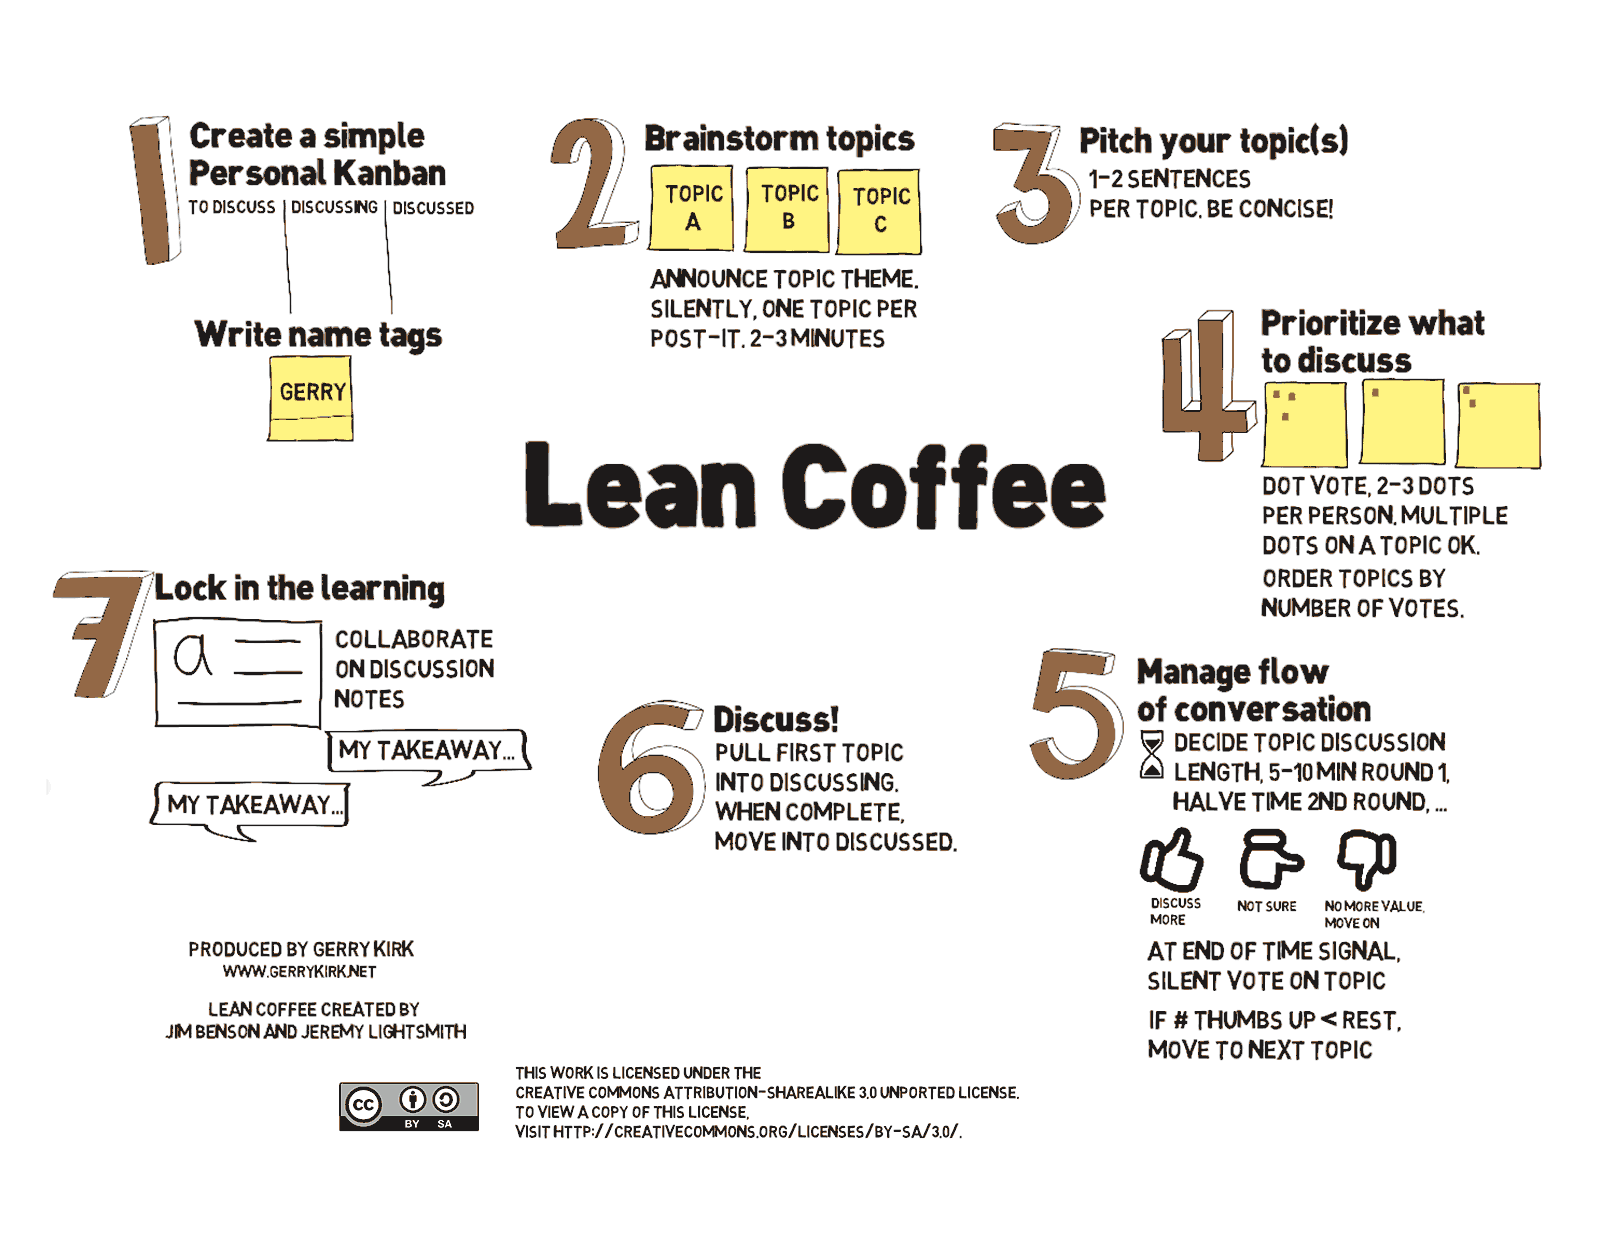 Steps in the Lean Coffee process